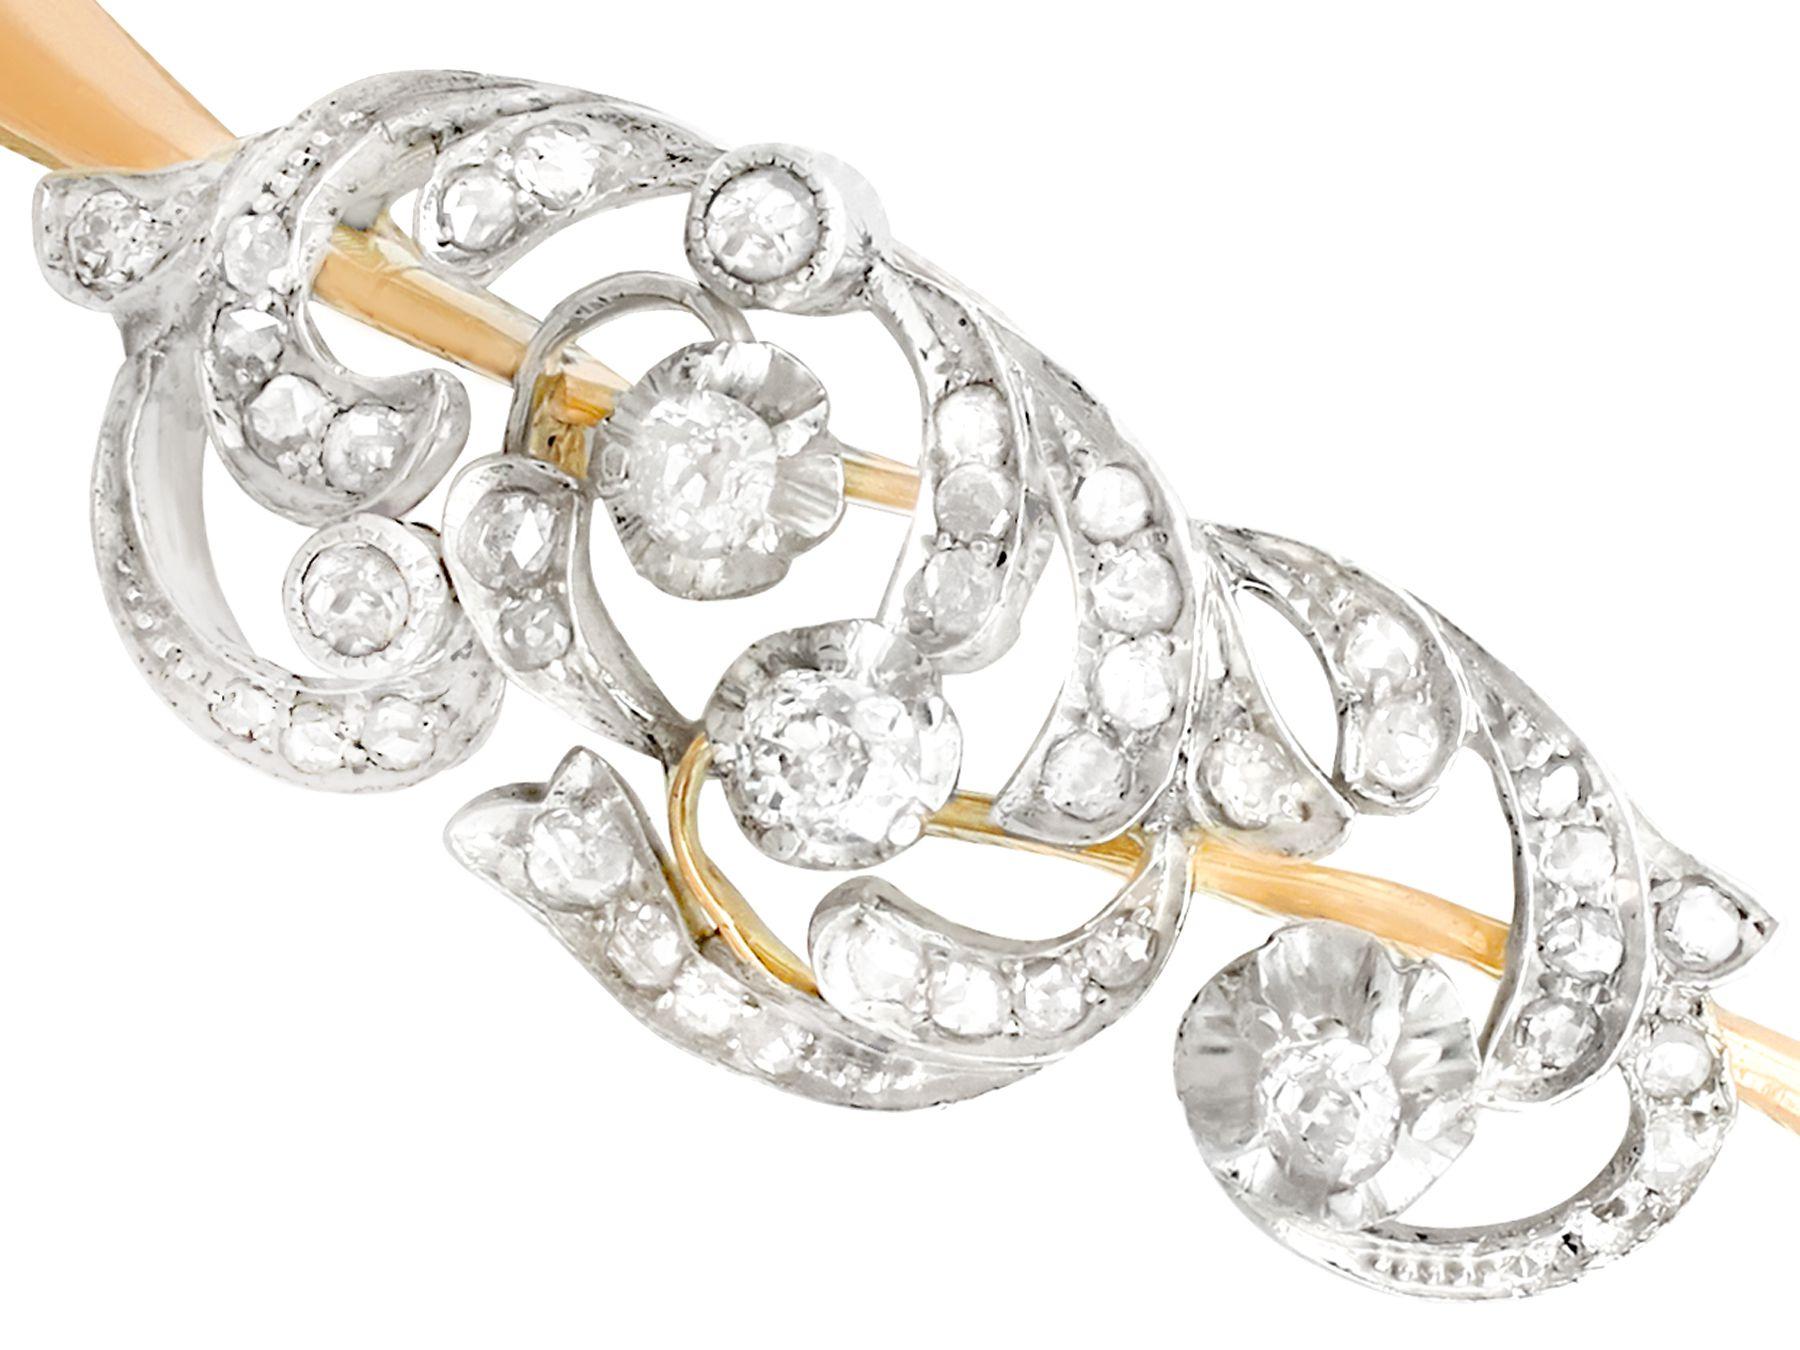 A stunning antique Russian 1.16 carat diamond and 14k yellow gold, 14k white gold set bangle; part of our diverse antique jewelry collections.

This stunning, fine and impressive diamond bangle has been crafted in 14k yellow gold with a 14k white